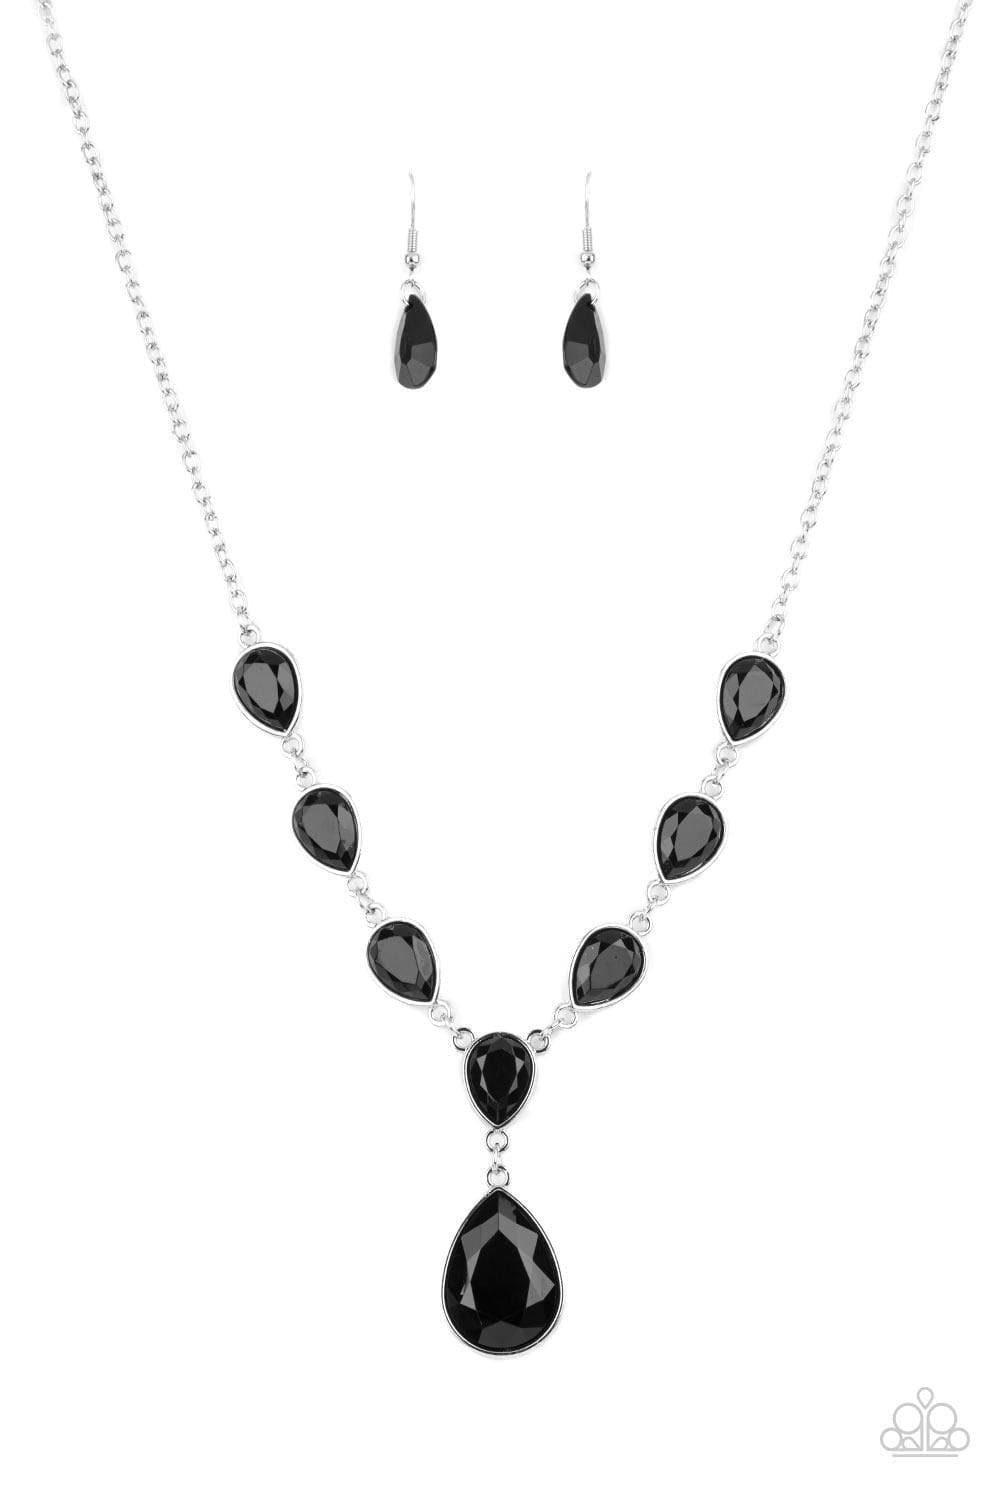 Paparazzi Accessories - Party Paradise - Black Necklace - Bling by JessieK